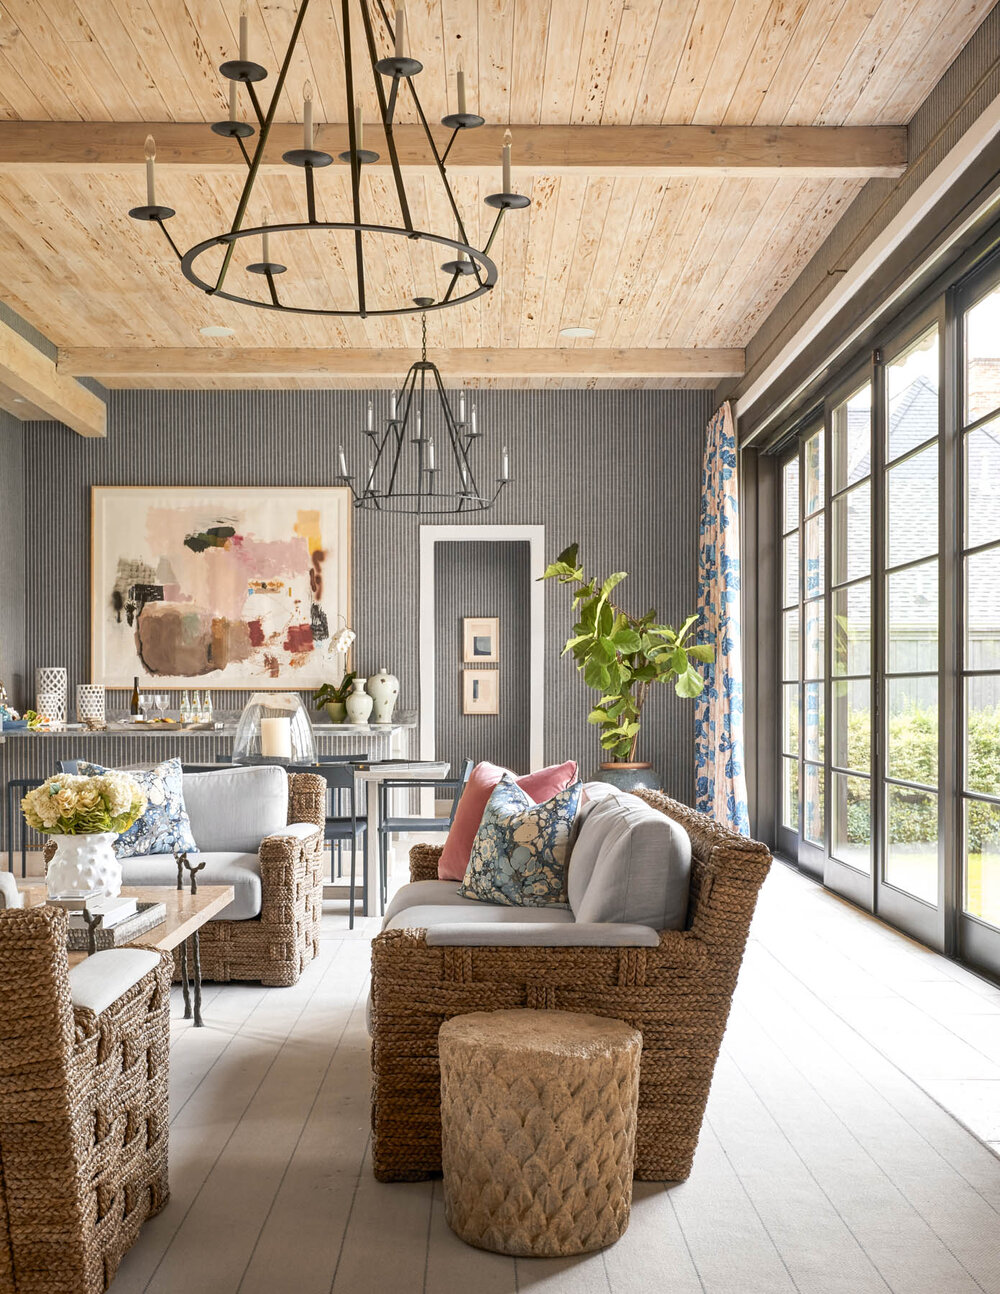 Delightful Dallas home from Designer Mary Beth Williams | Photography Nathan Schroder. Love the family room with the wood beam ceiling and the woven textured furniture int the interiors